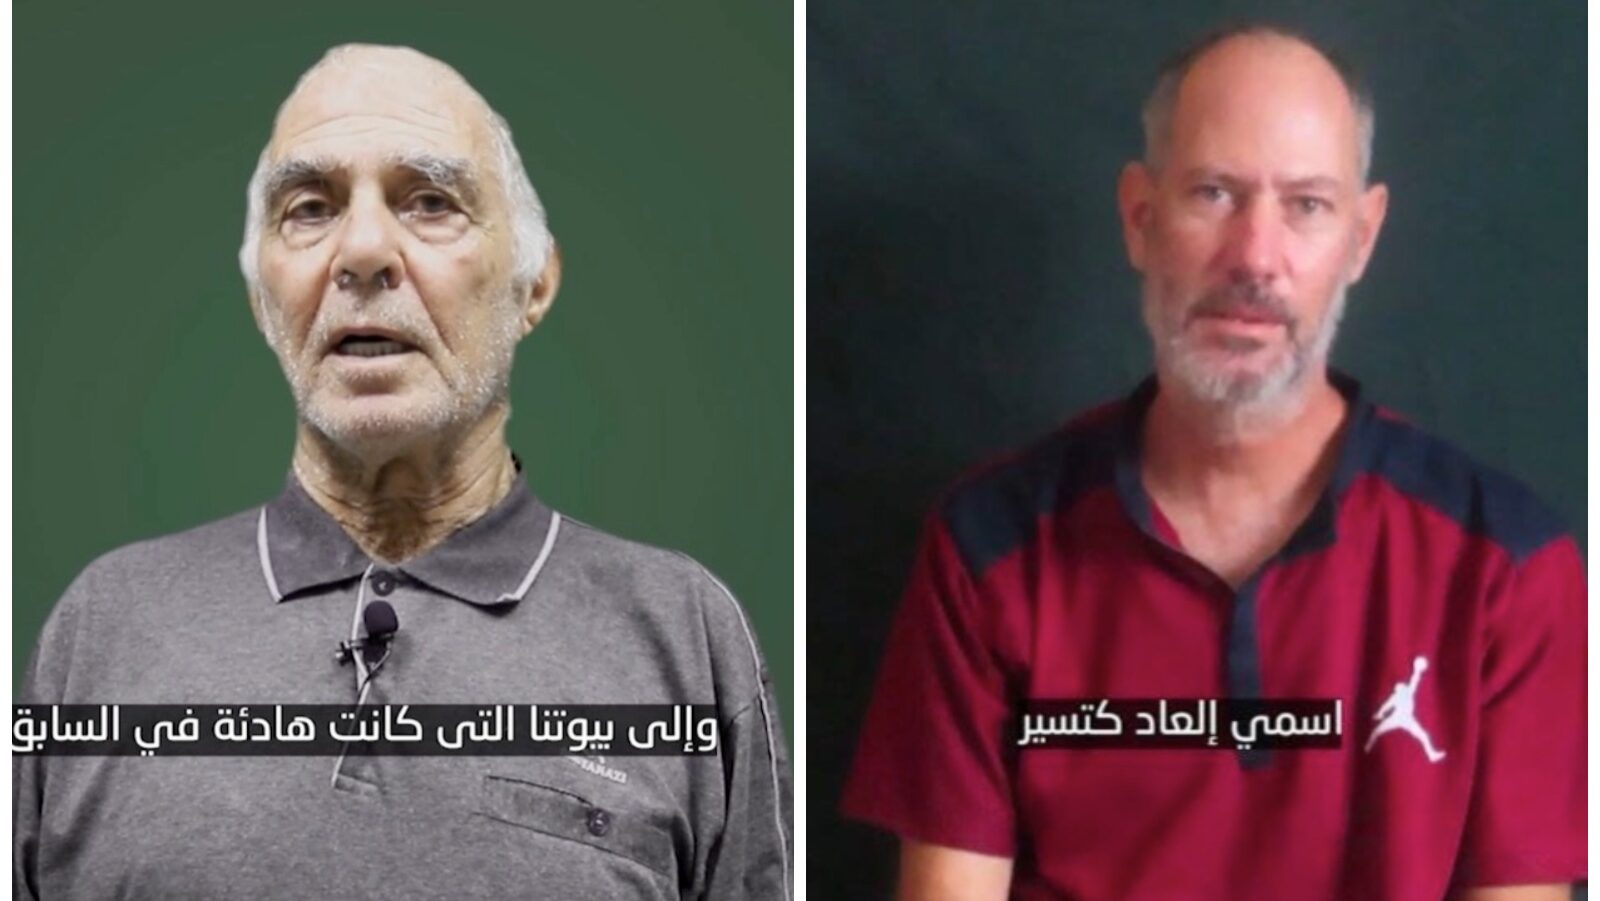 Hostages Plead for Freedom in Disturbing Video Released by Palestinian Islamic Jihad